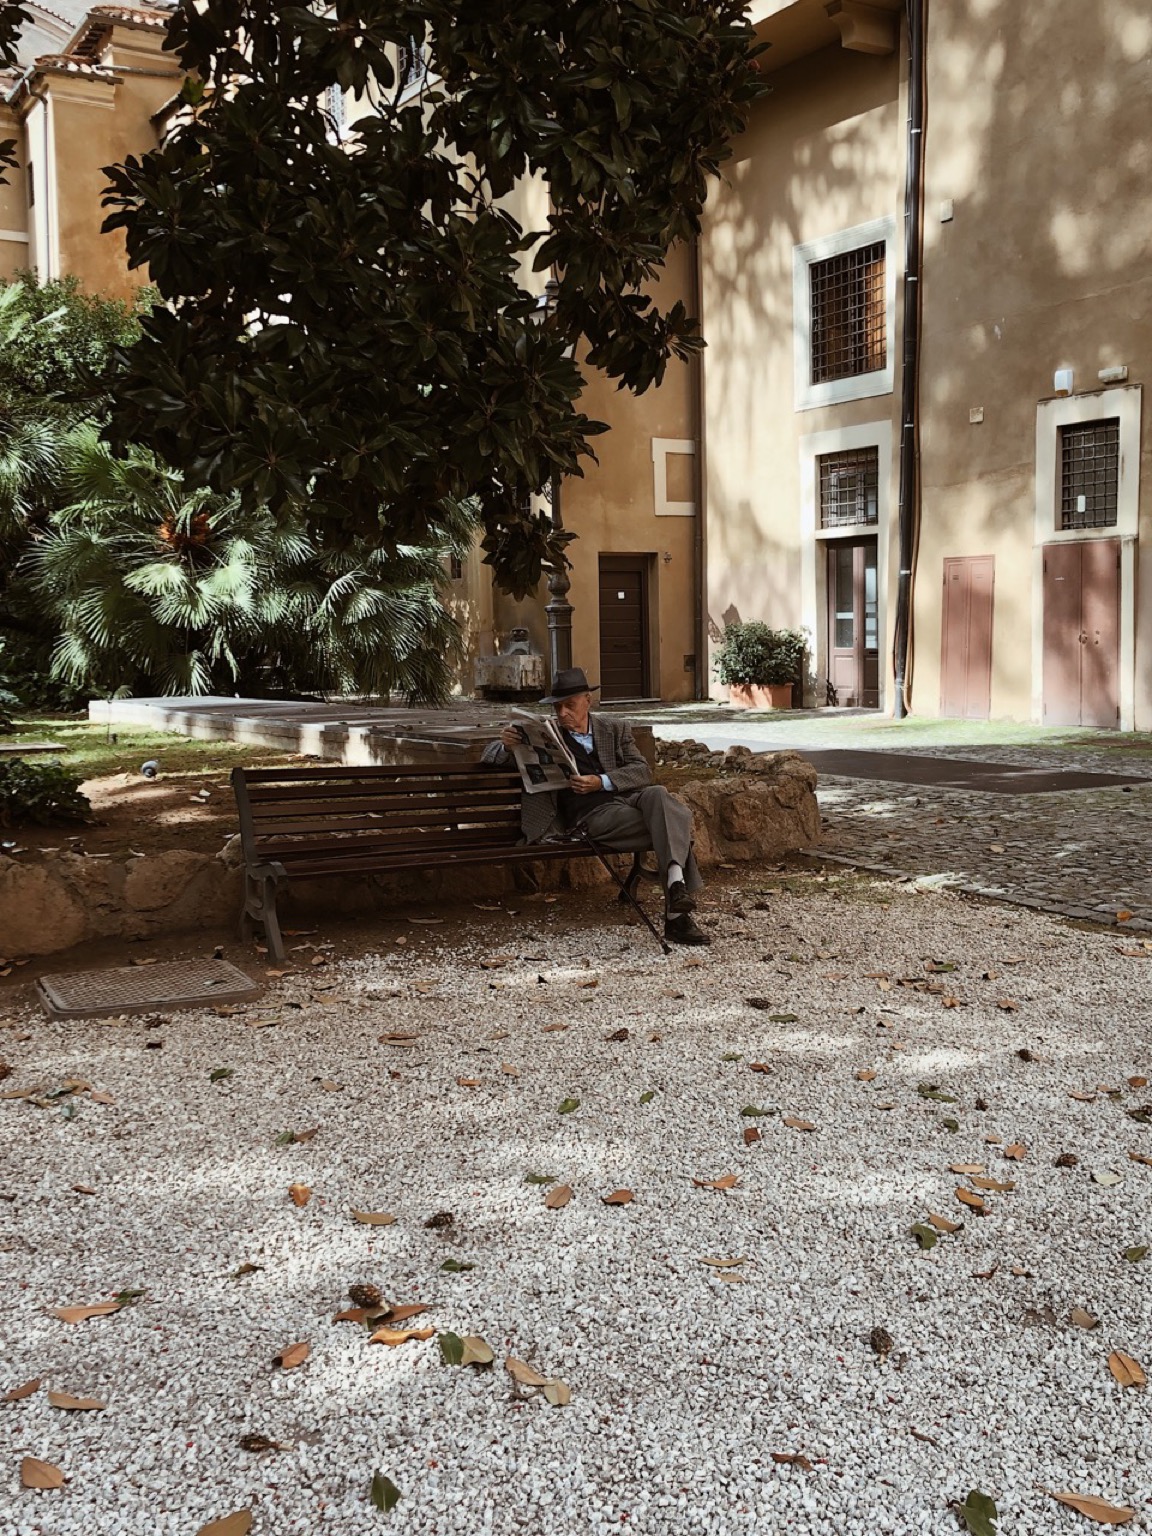 A man is seating on a bench in a park in Rome. He is wearing a costume and a hat while reading a newspaper.